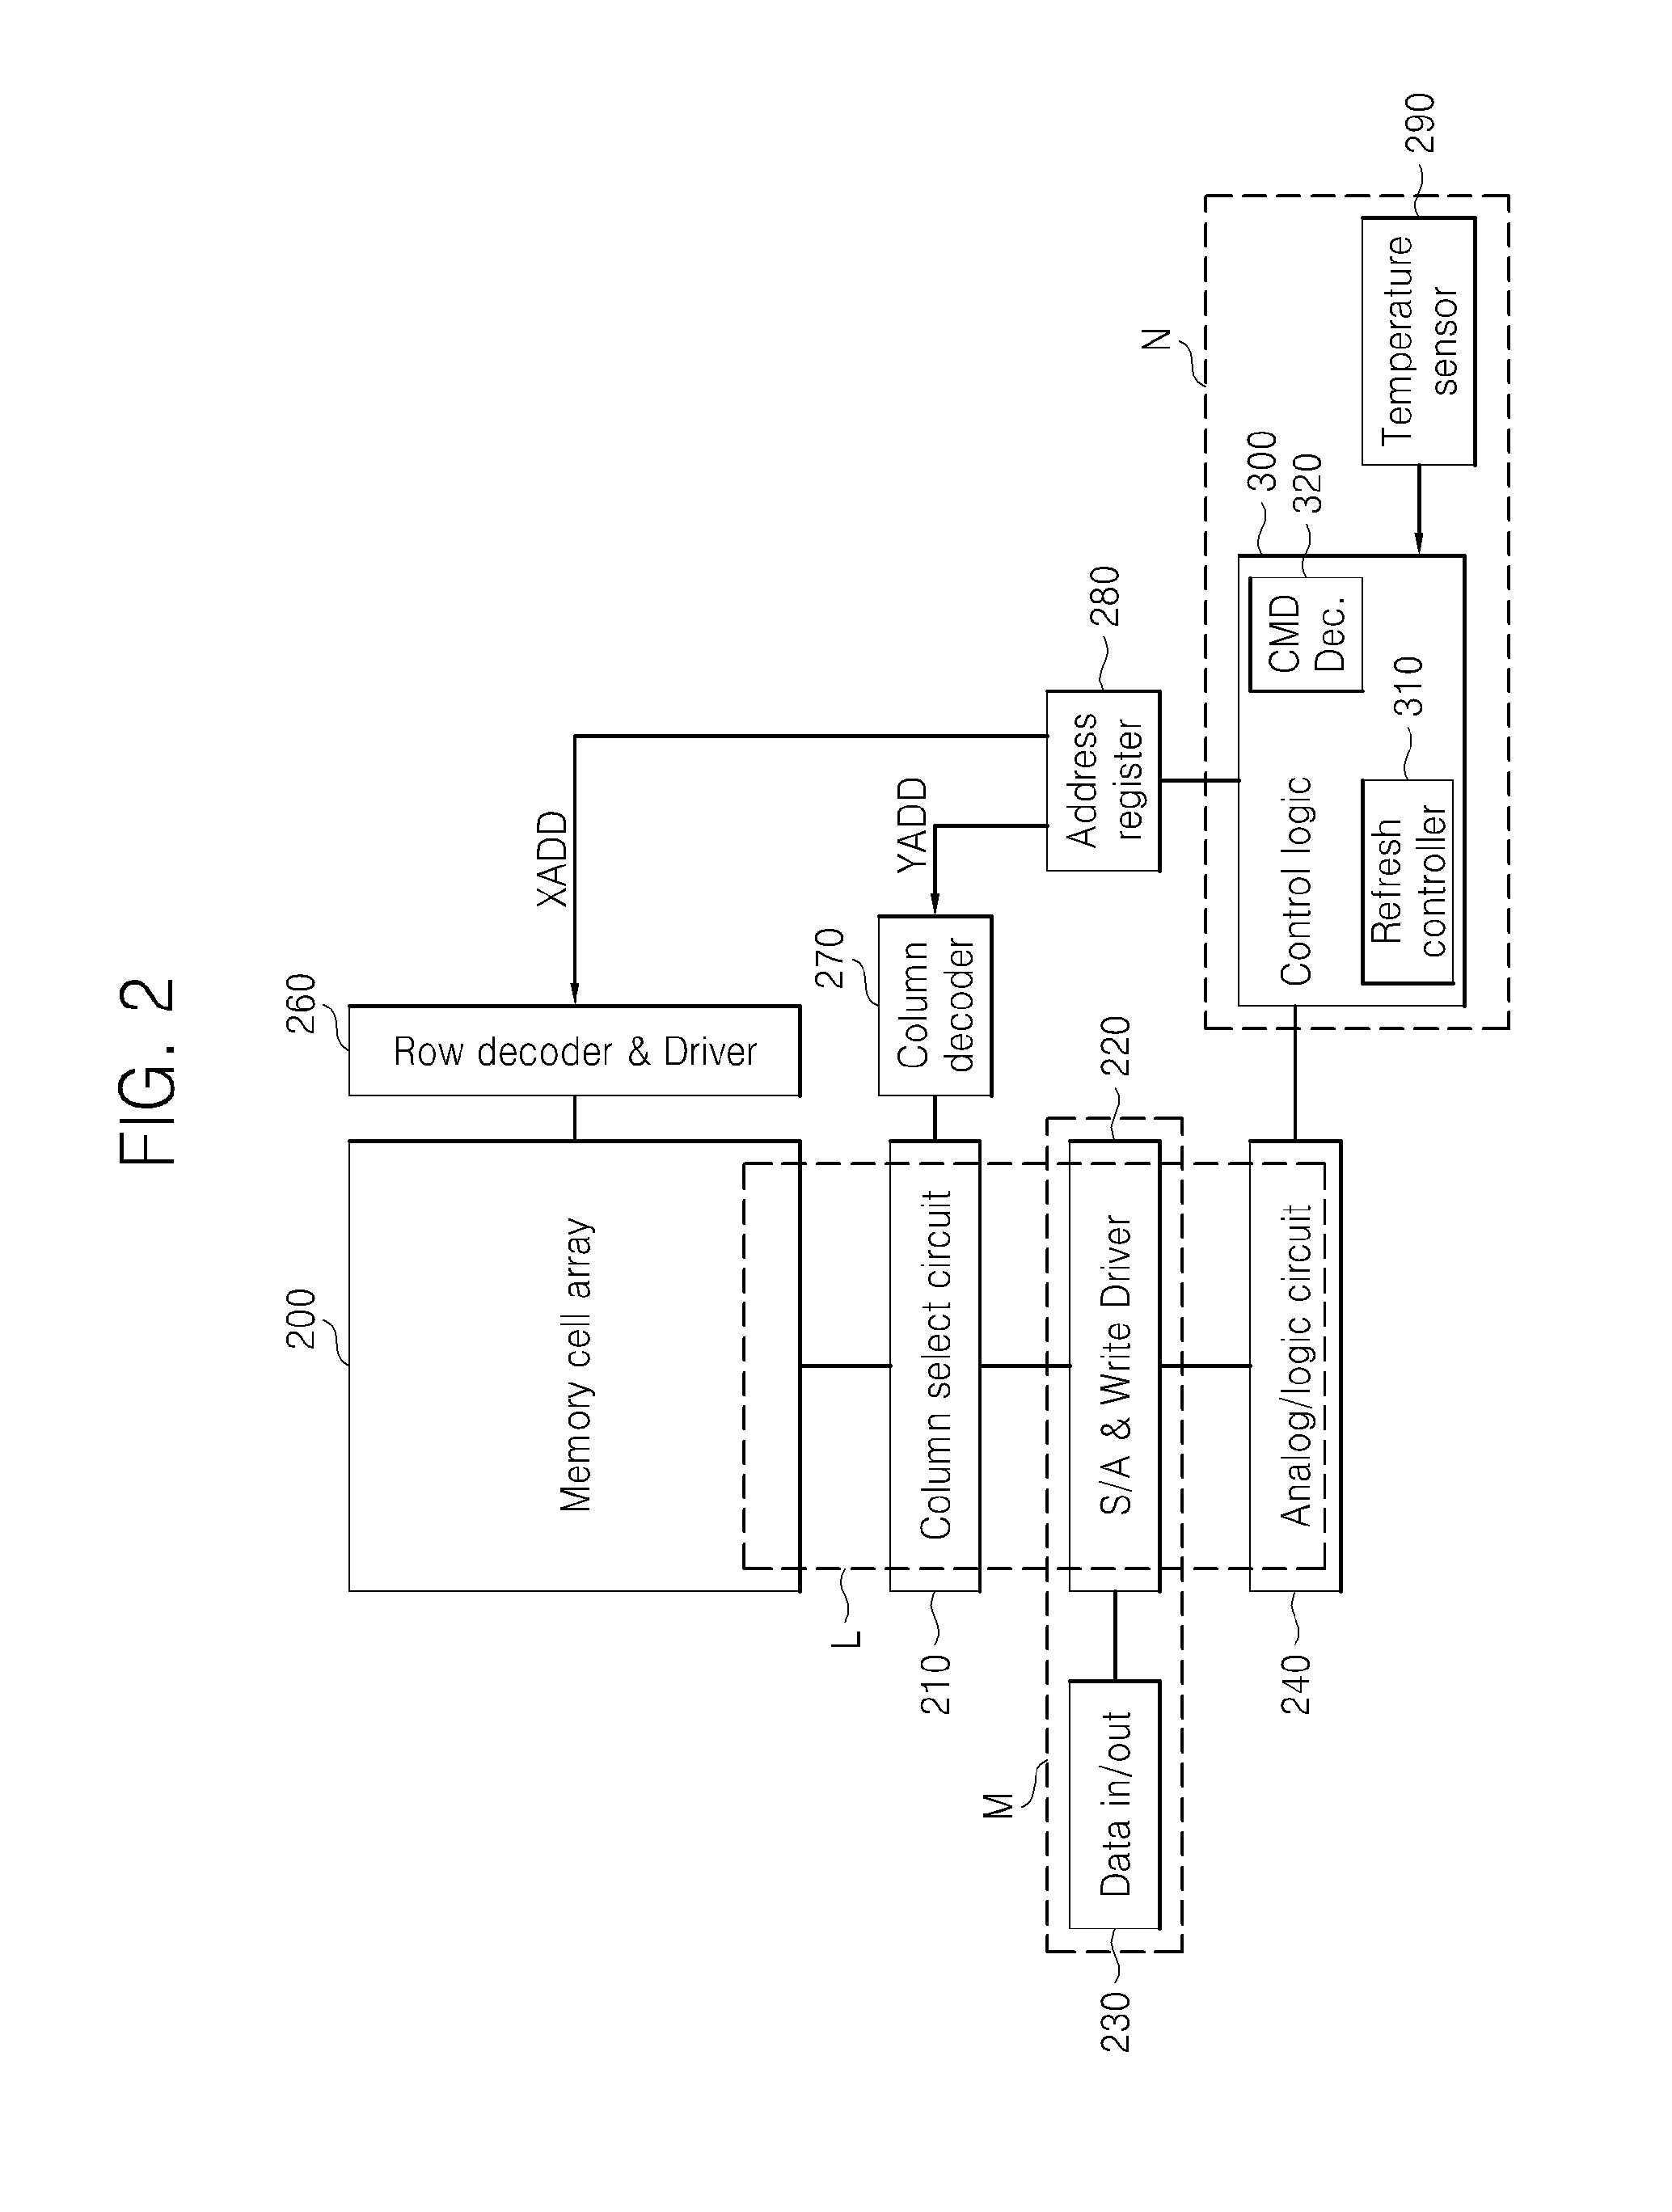 Resistive memory device and method of controlling refresh operation of resistive memory device